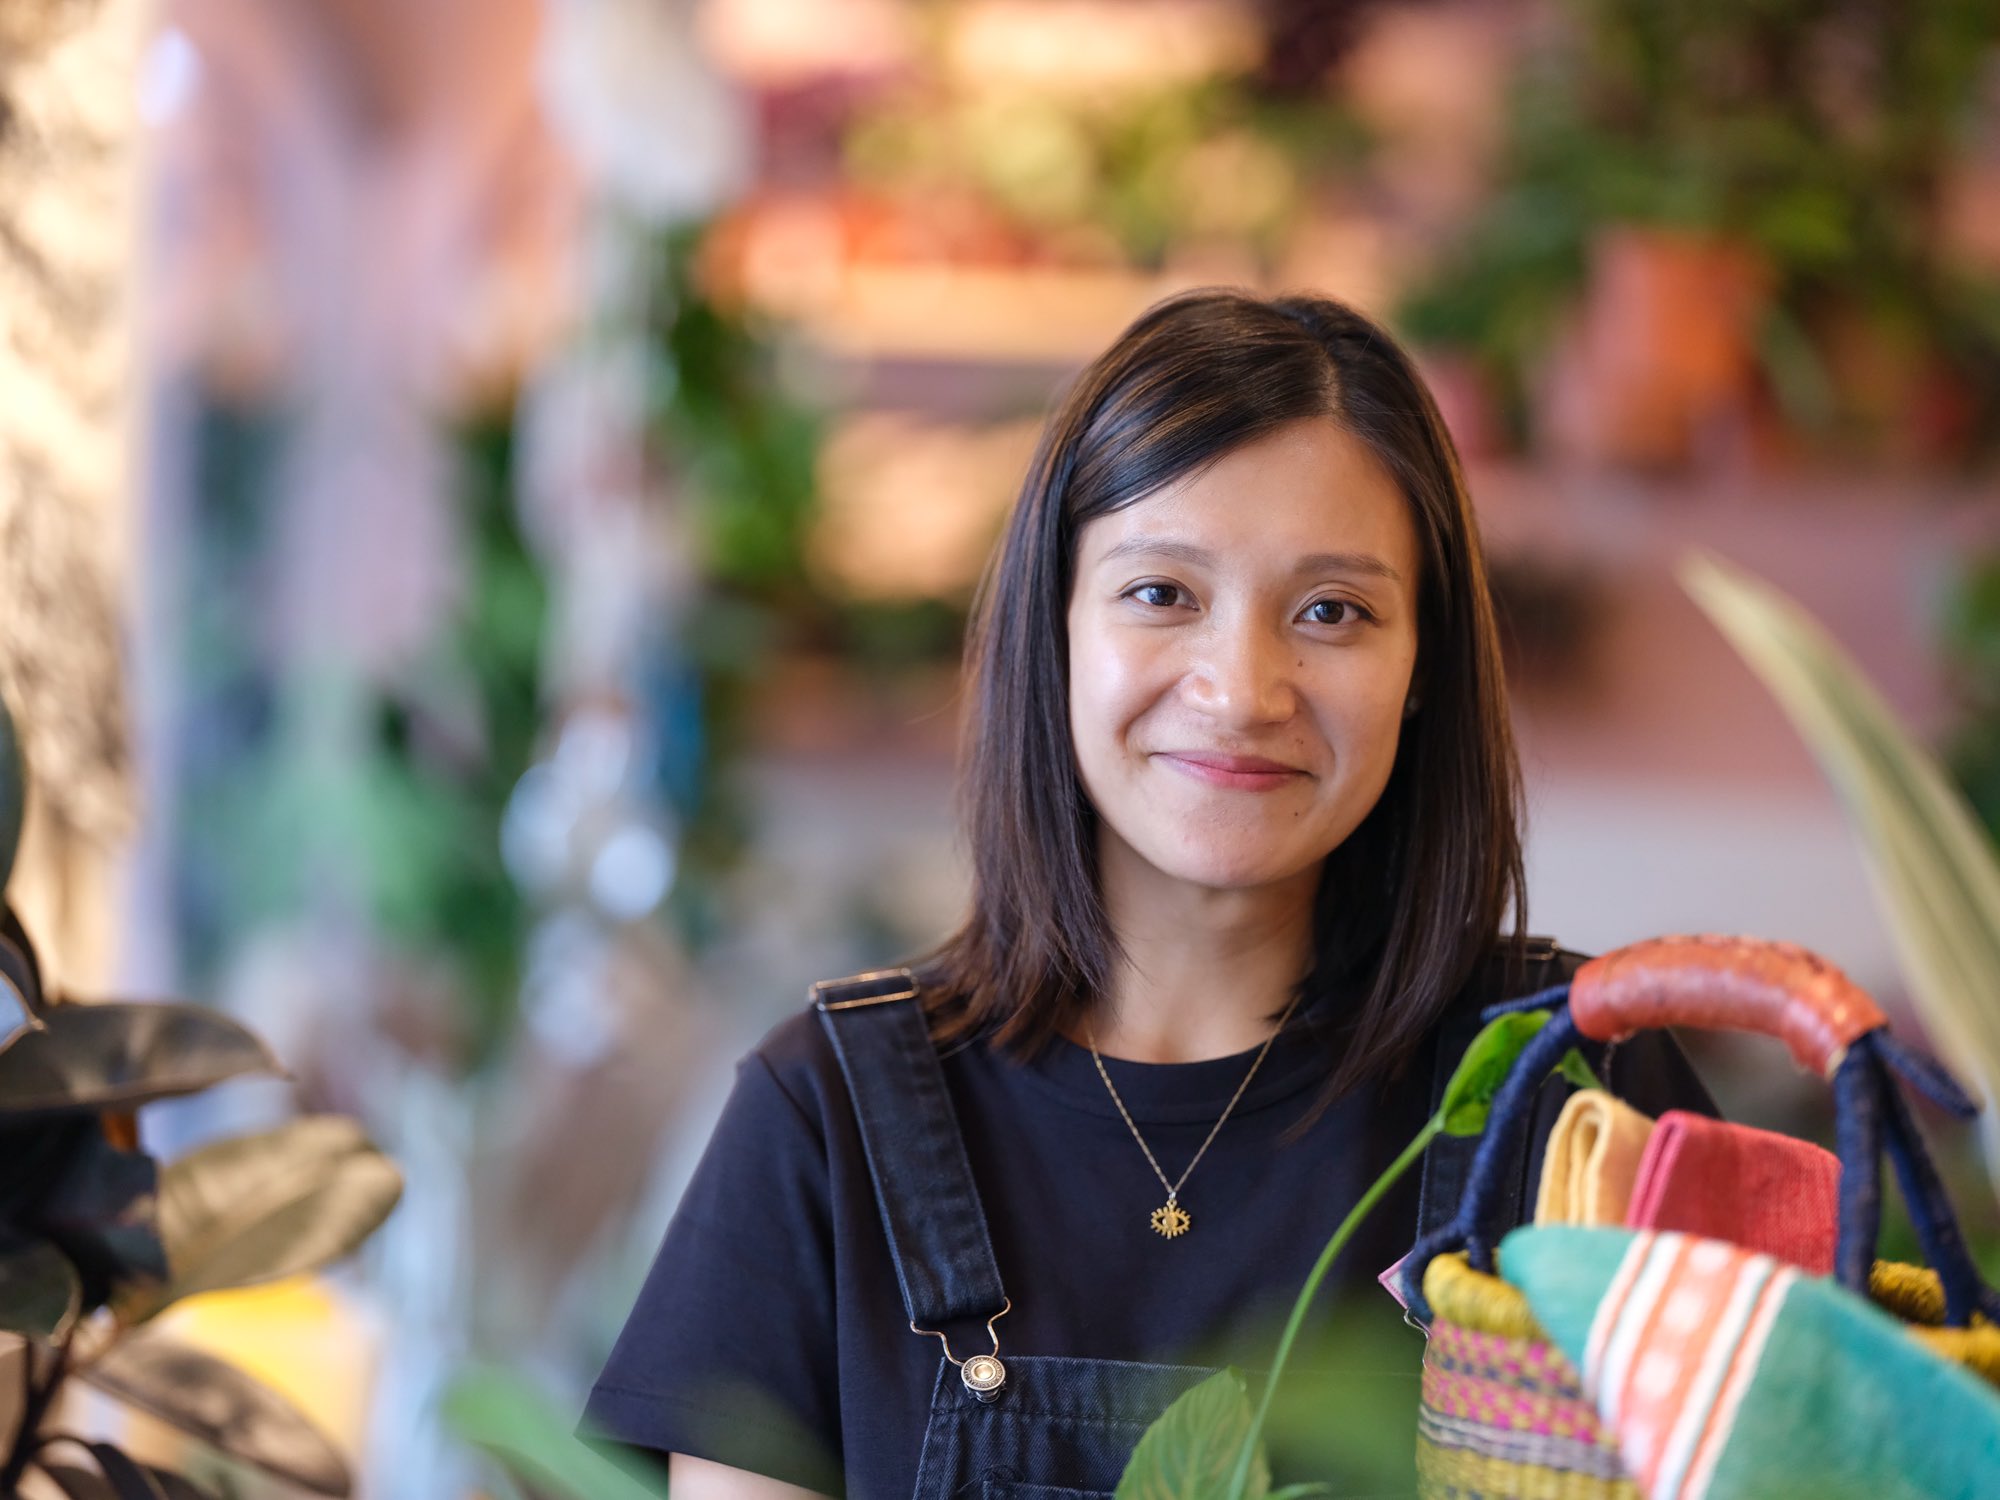 woman in apron working in plant store smiling at camera